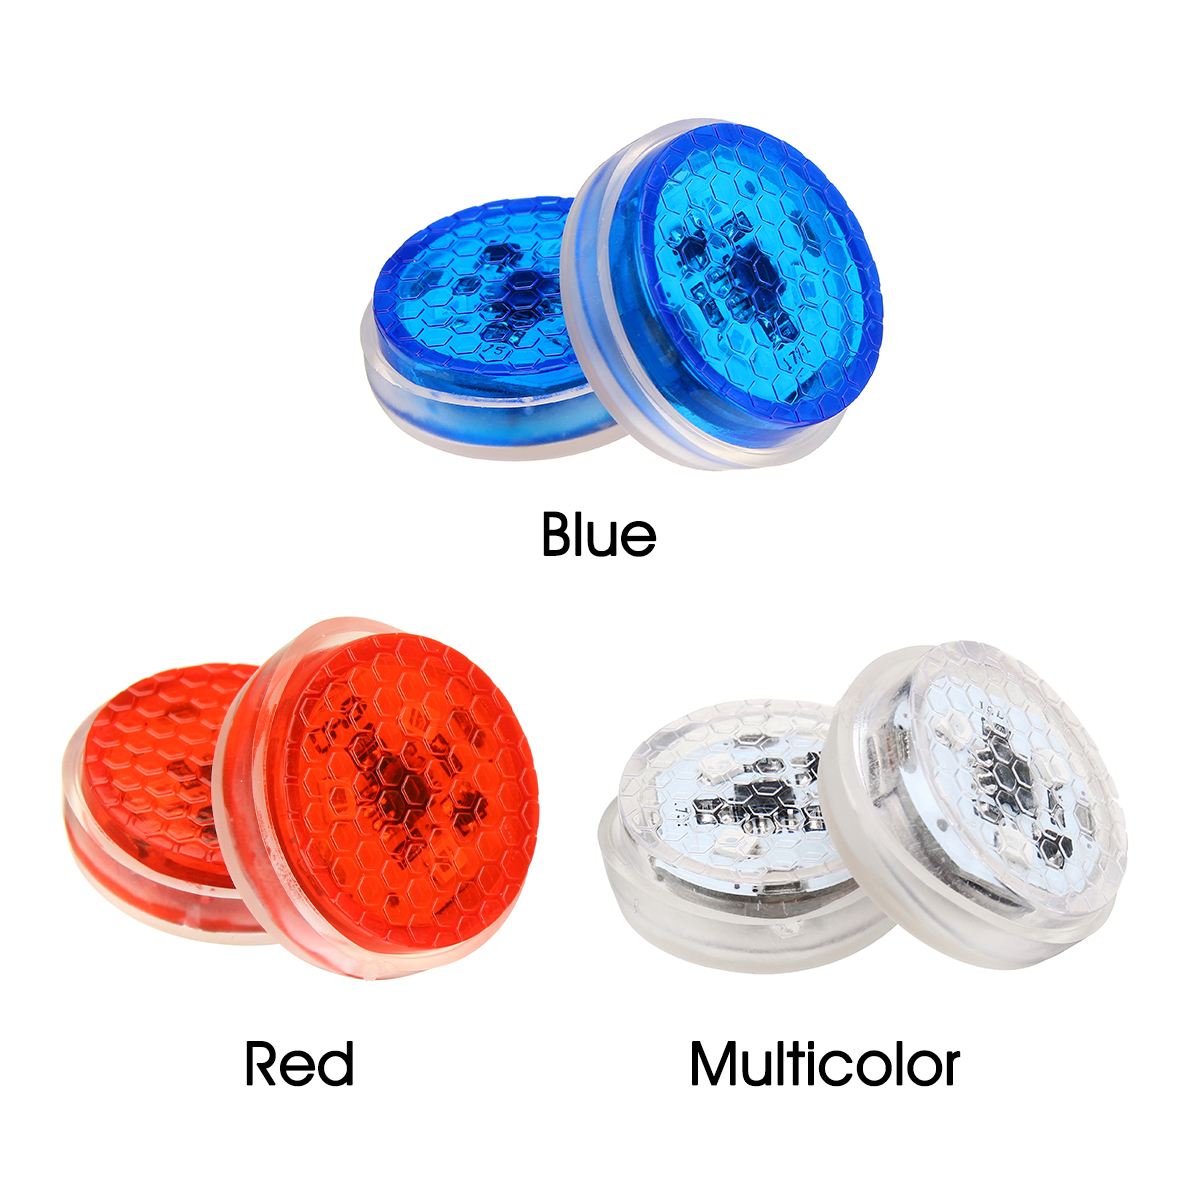 Universal-Wireless-LED-Car-Door-Opening-Warning-Light-Safety-Flash-Signal-Lamp-Anti-collision-3-Colo-1417651